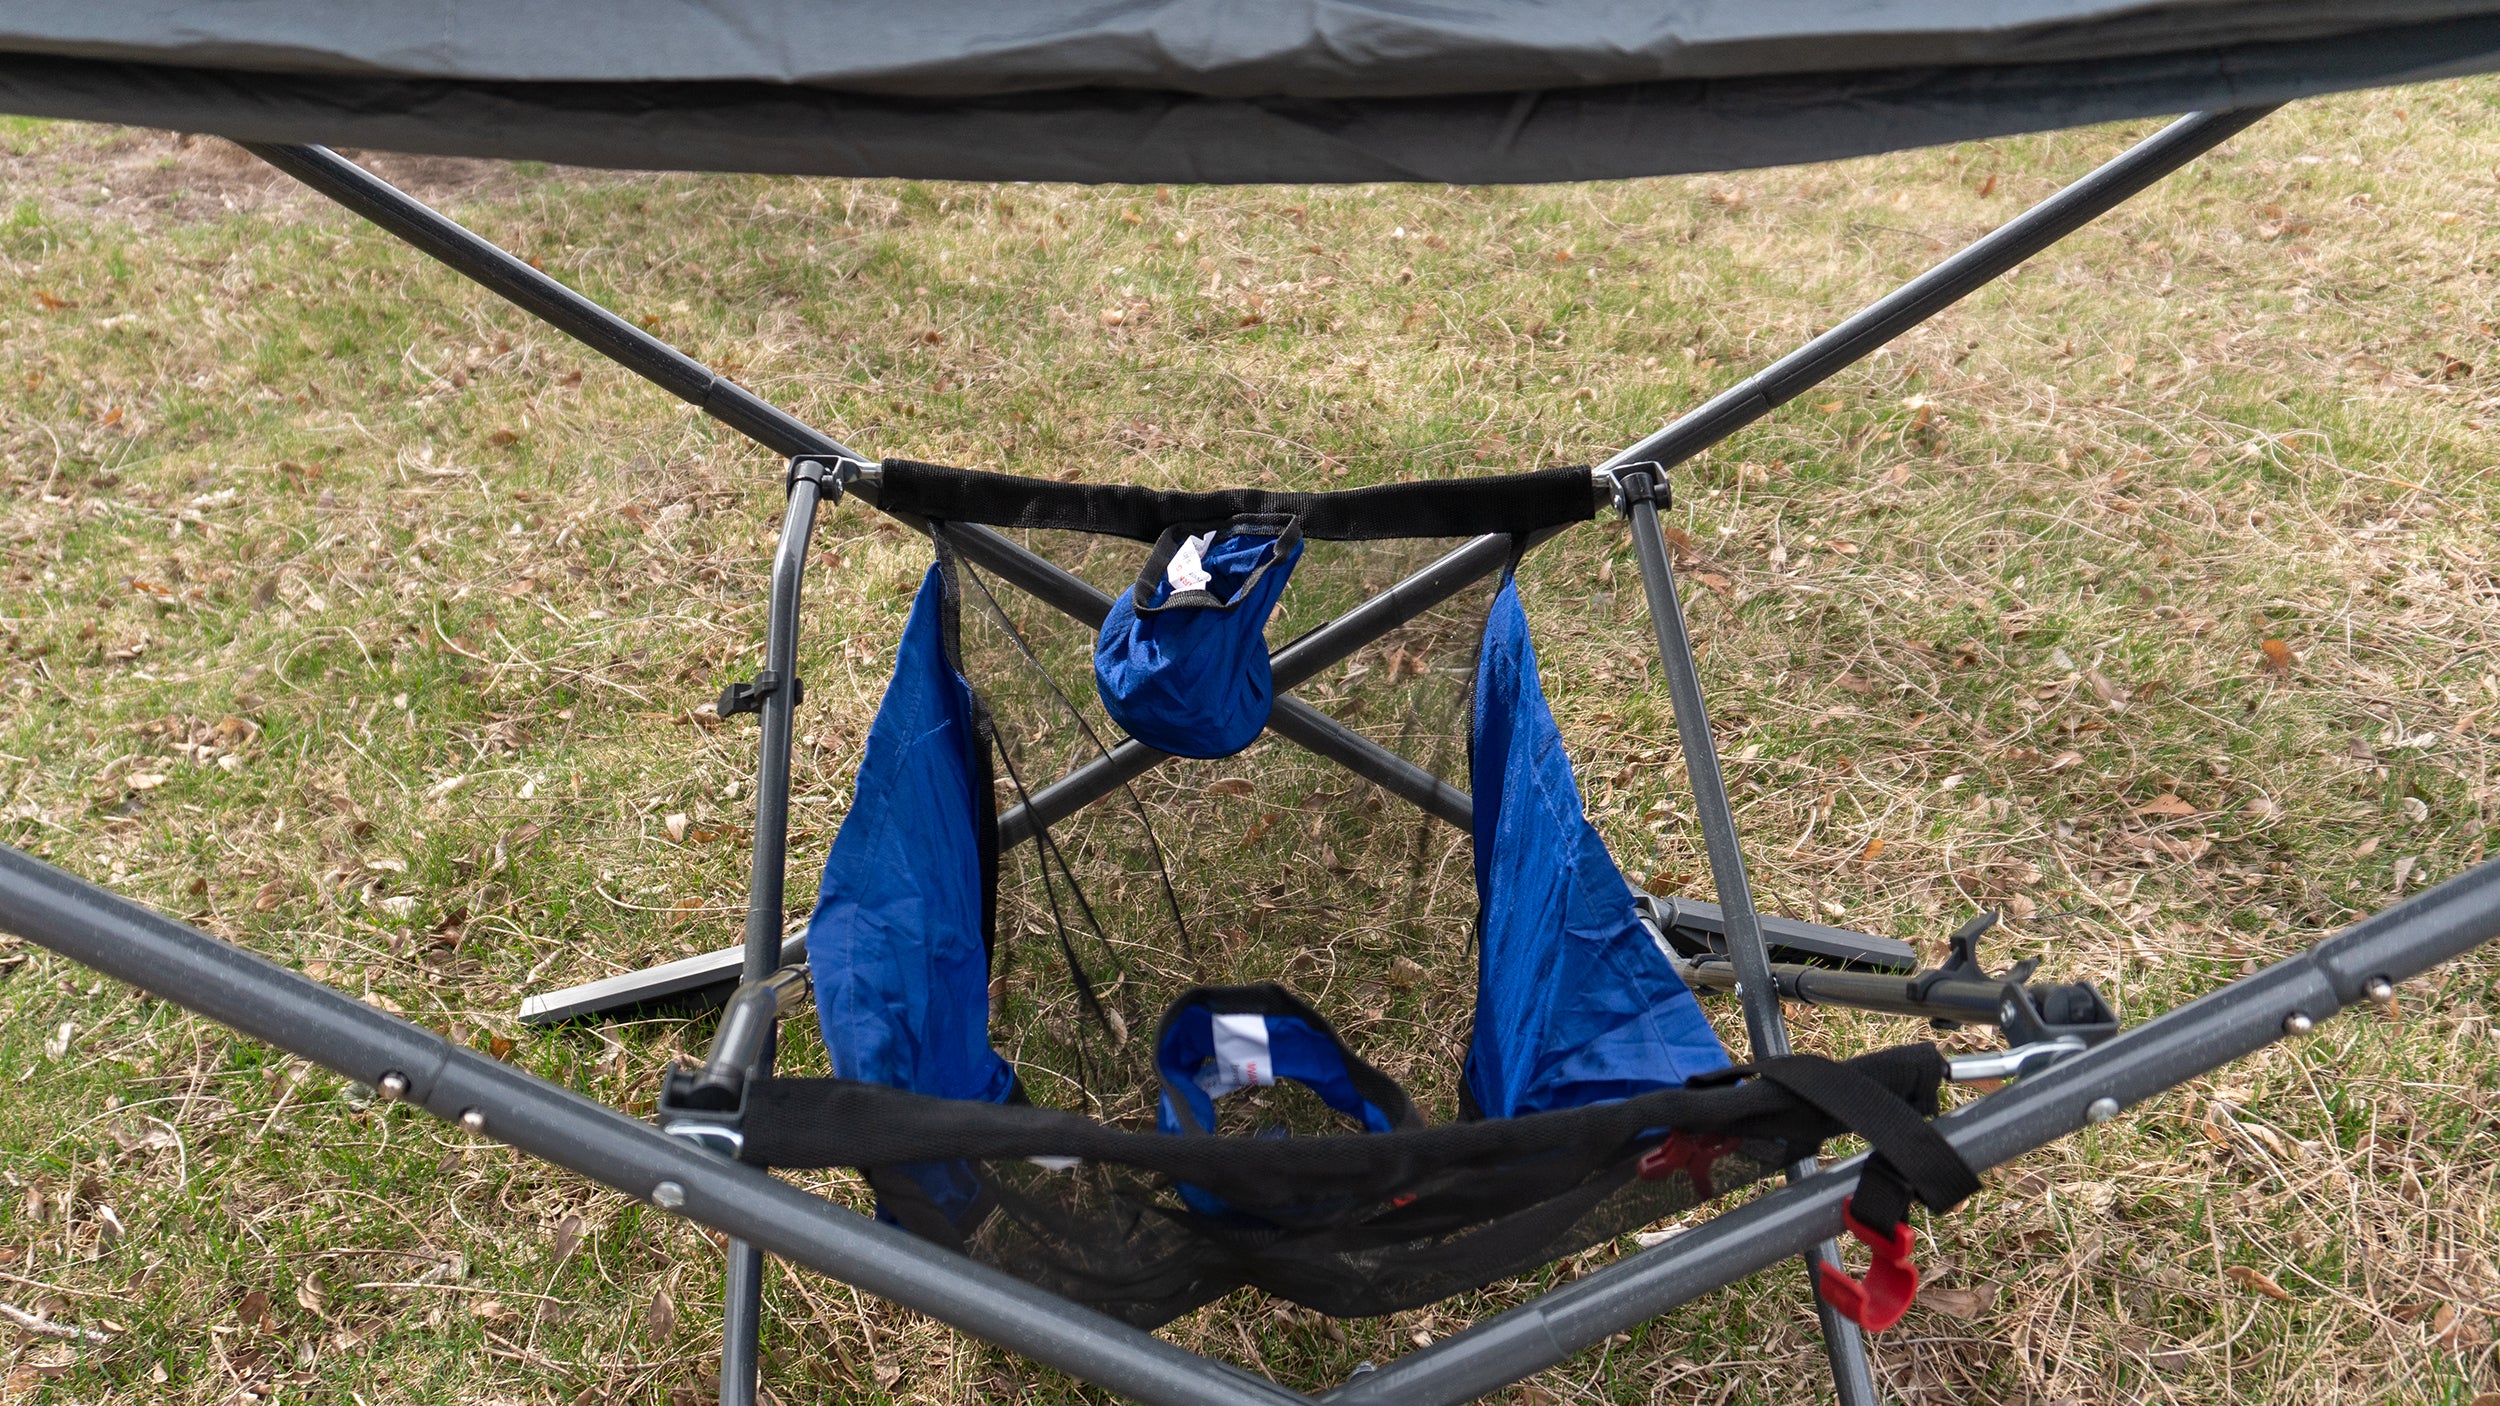 An under-hammock mesh storage basket includes a pair of fabric cup holders, but they're not easy to reach while you're stretched out on top. (Photo: Andrew Liszewski/Gizmodo)